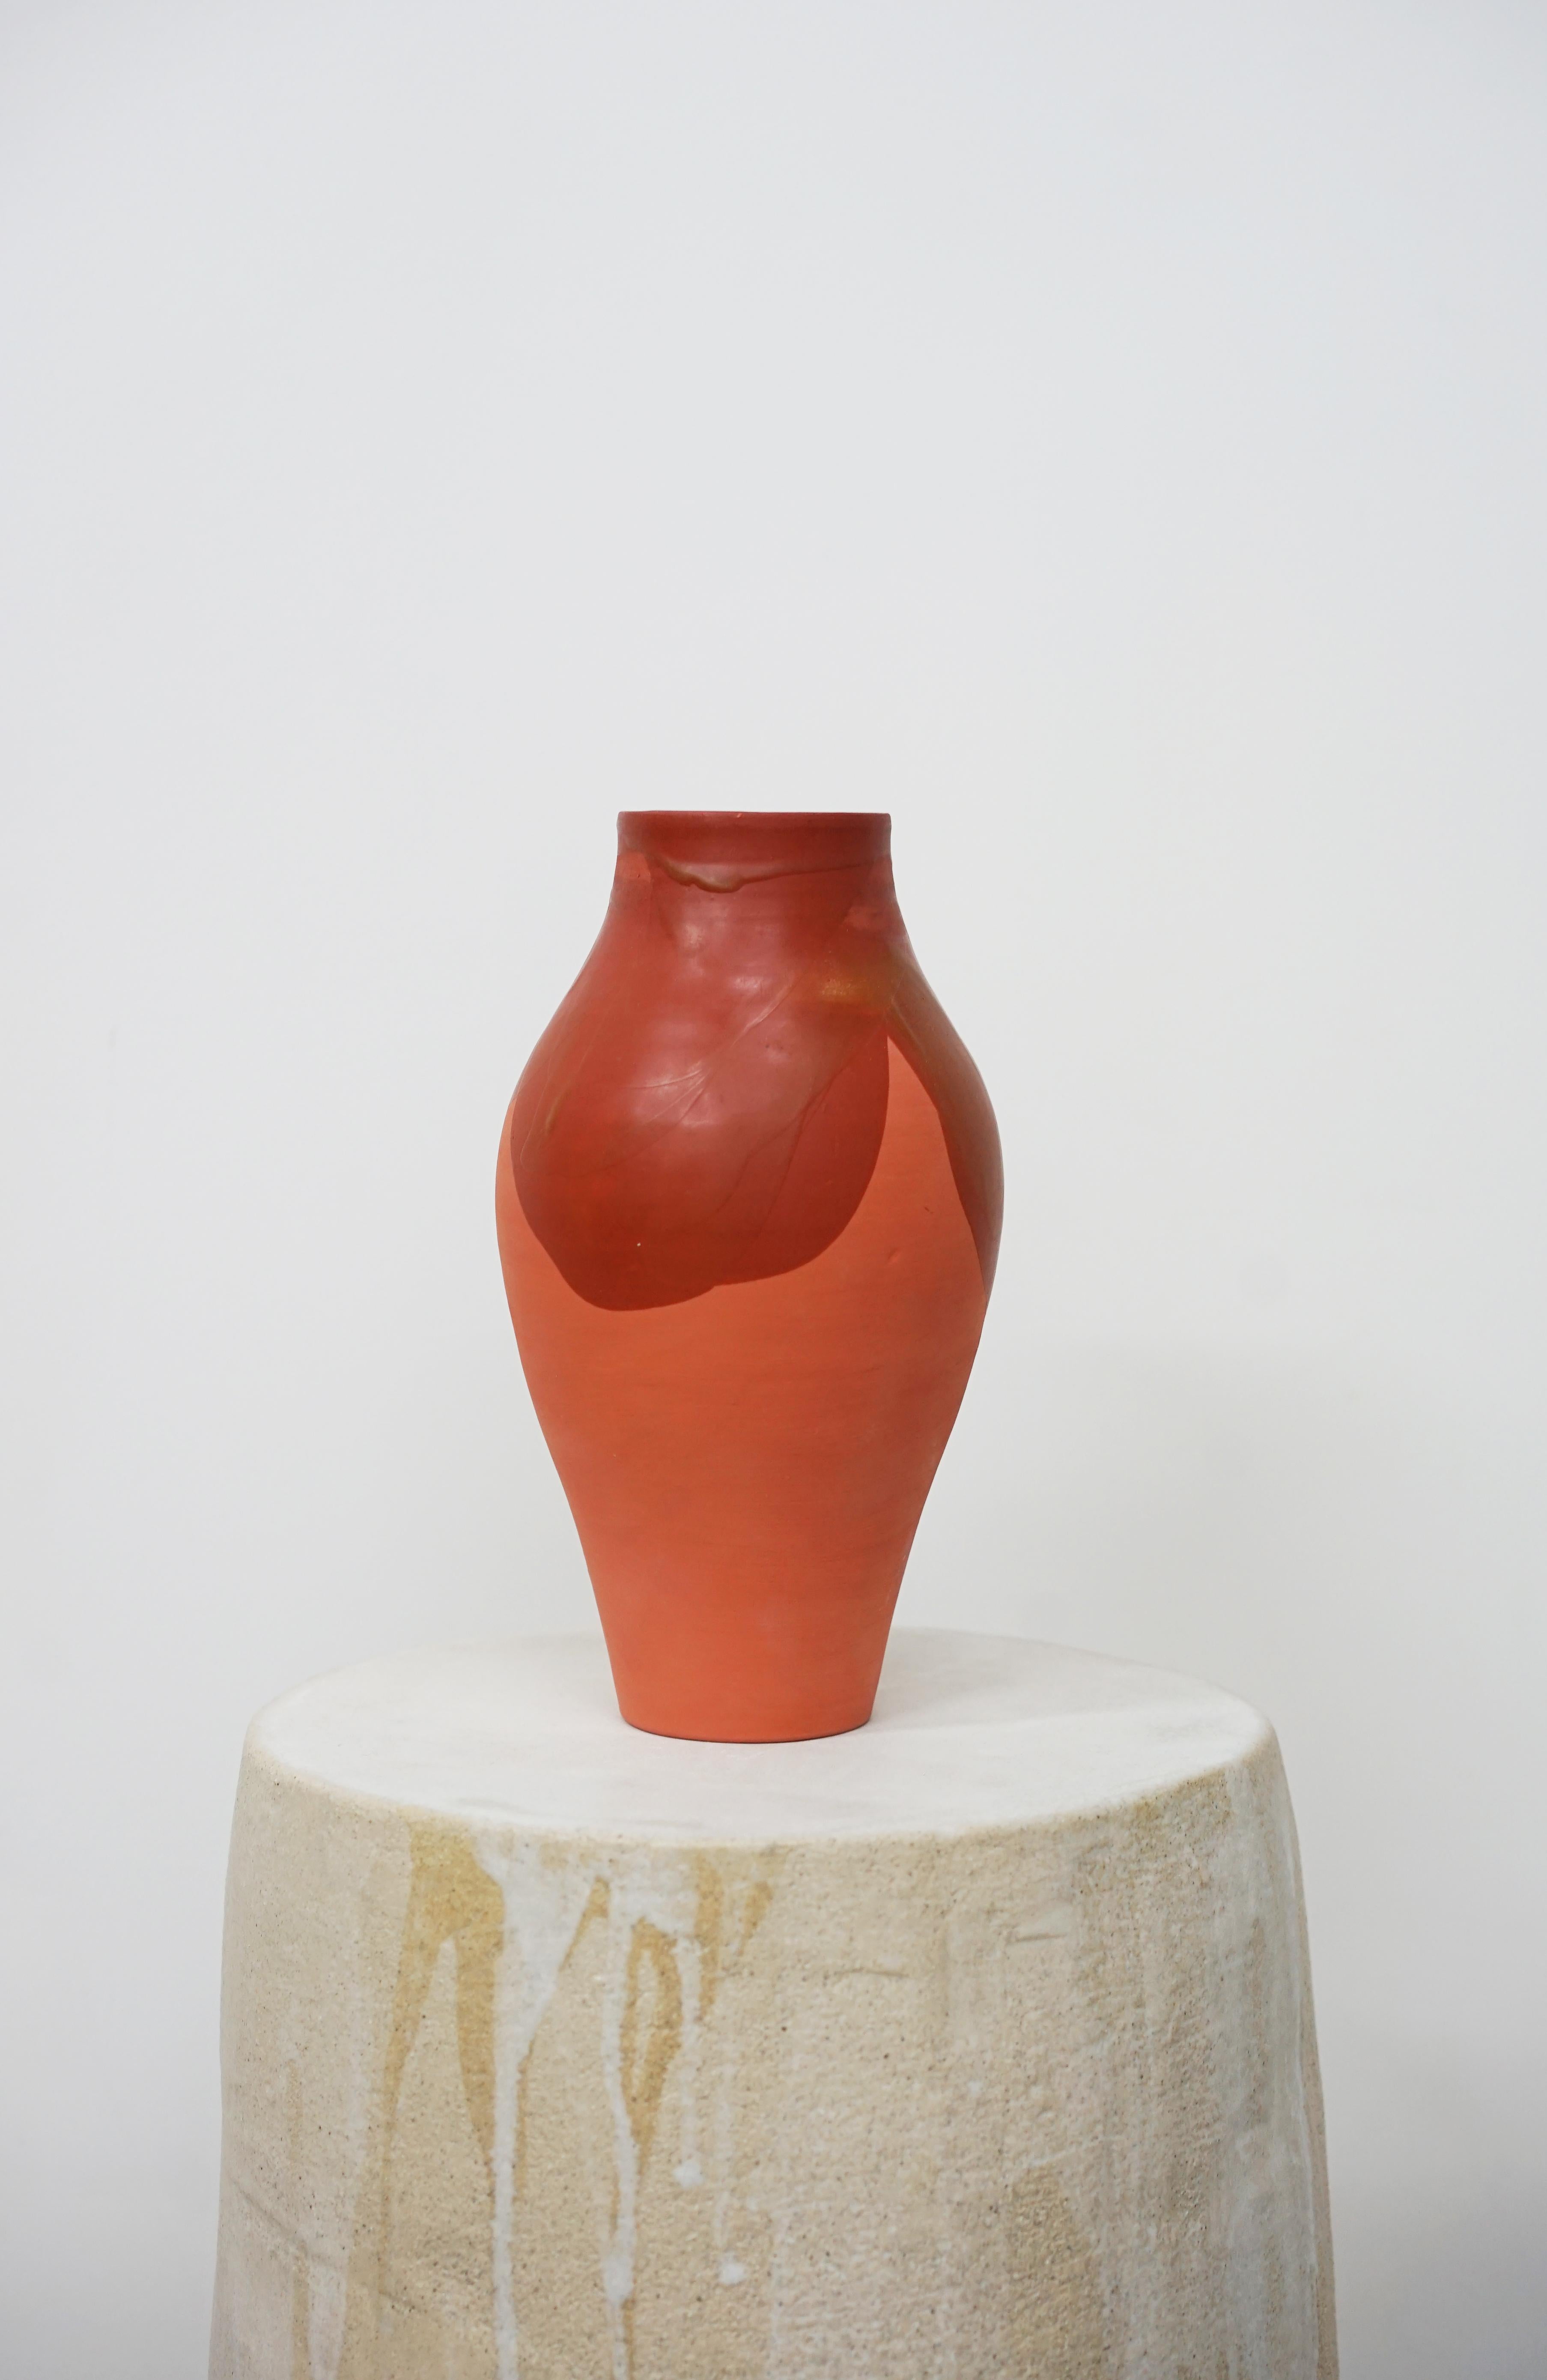 OTOMA_12 Vase by Emmanuelle Roule
Unique piece.
Dimensions: Ø 10 x H 23 cm.
Materials: Terracotta and beewax.

Vase made of terracotta and beewax. Not waterproof and made for low temperature. Please contact us.

Creative studio founded in